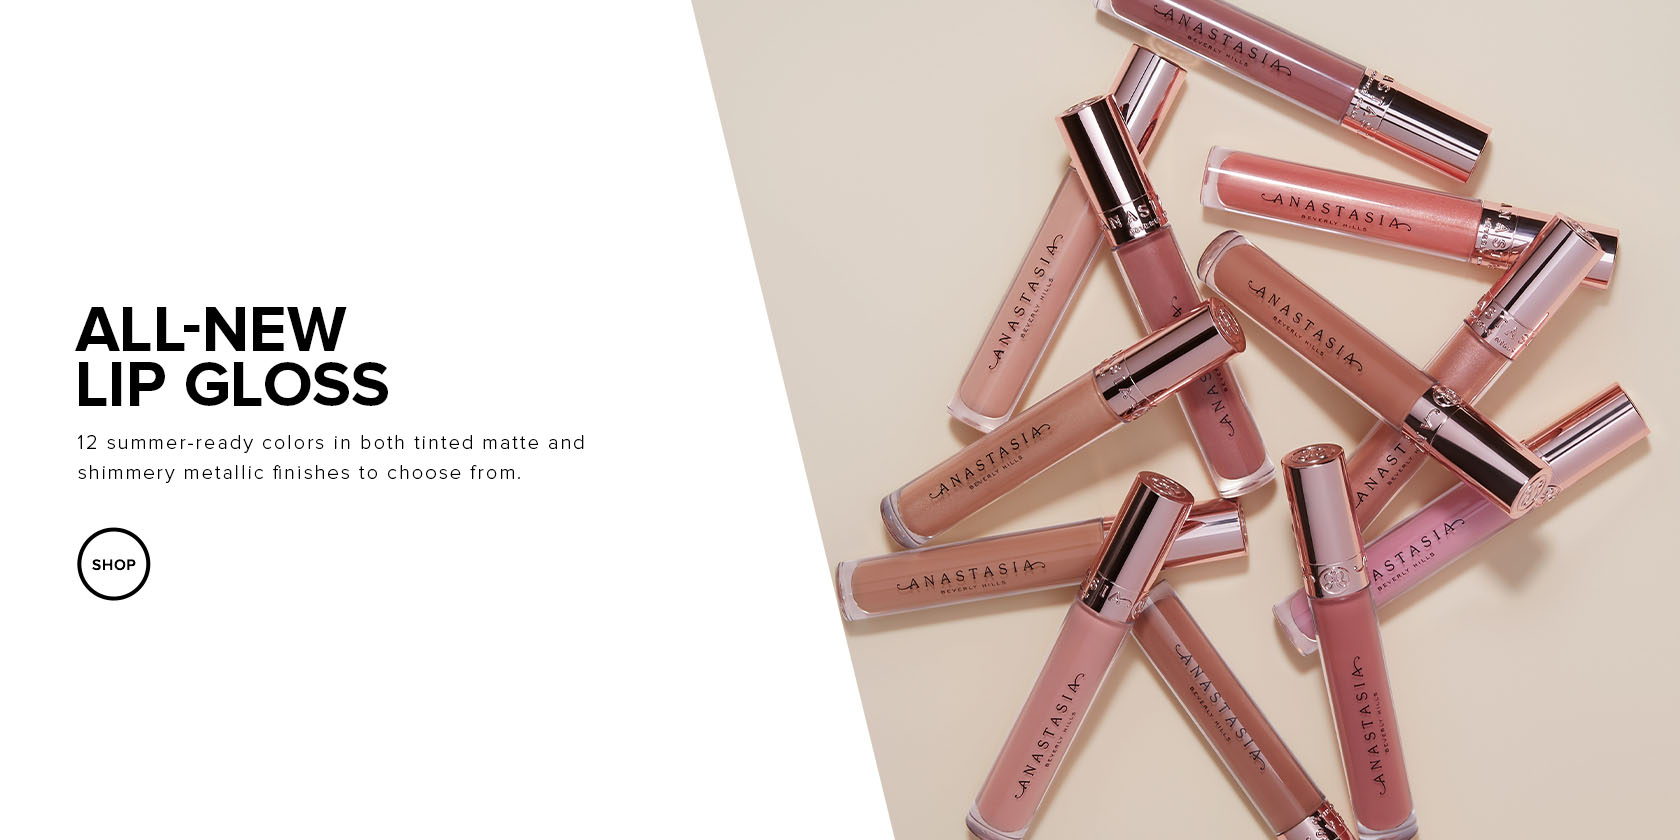 All-New Lip Gloss. 12 summer-ready colors in both tinted matte and shimmery metallic finishes to choose from.